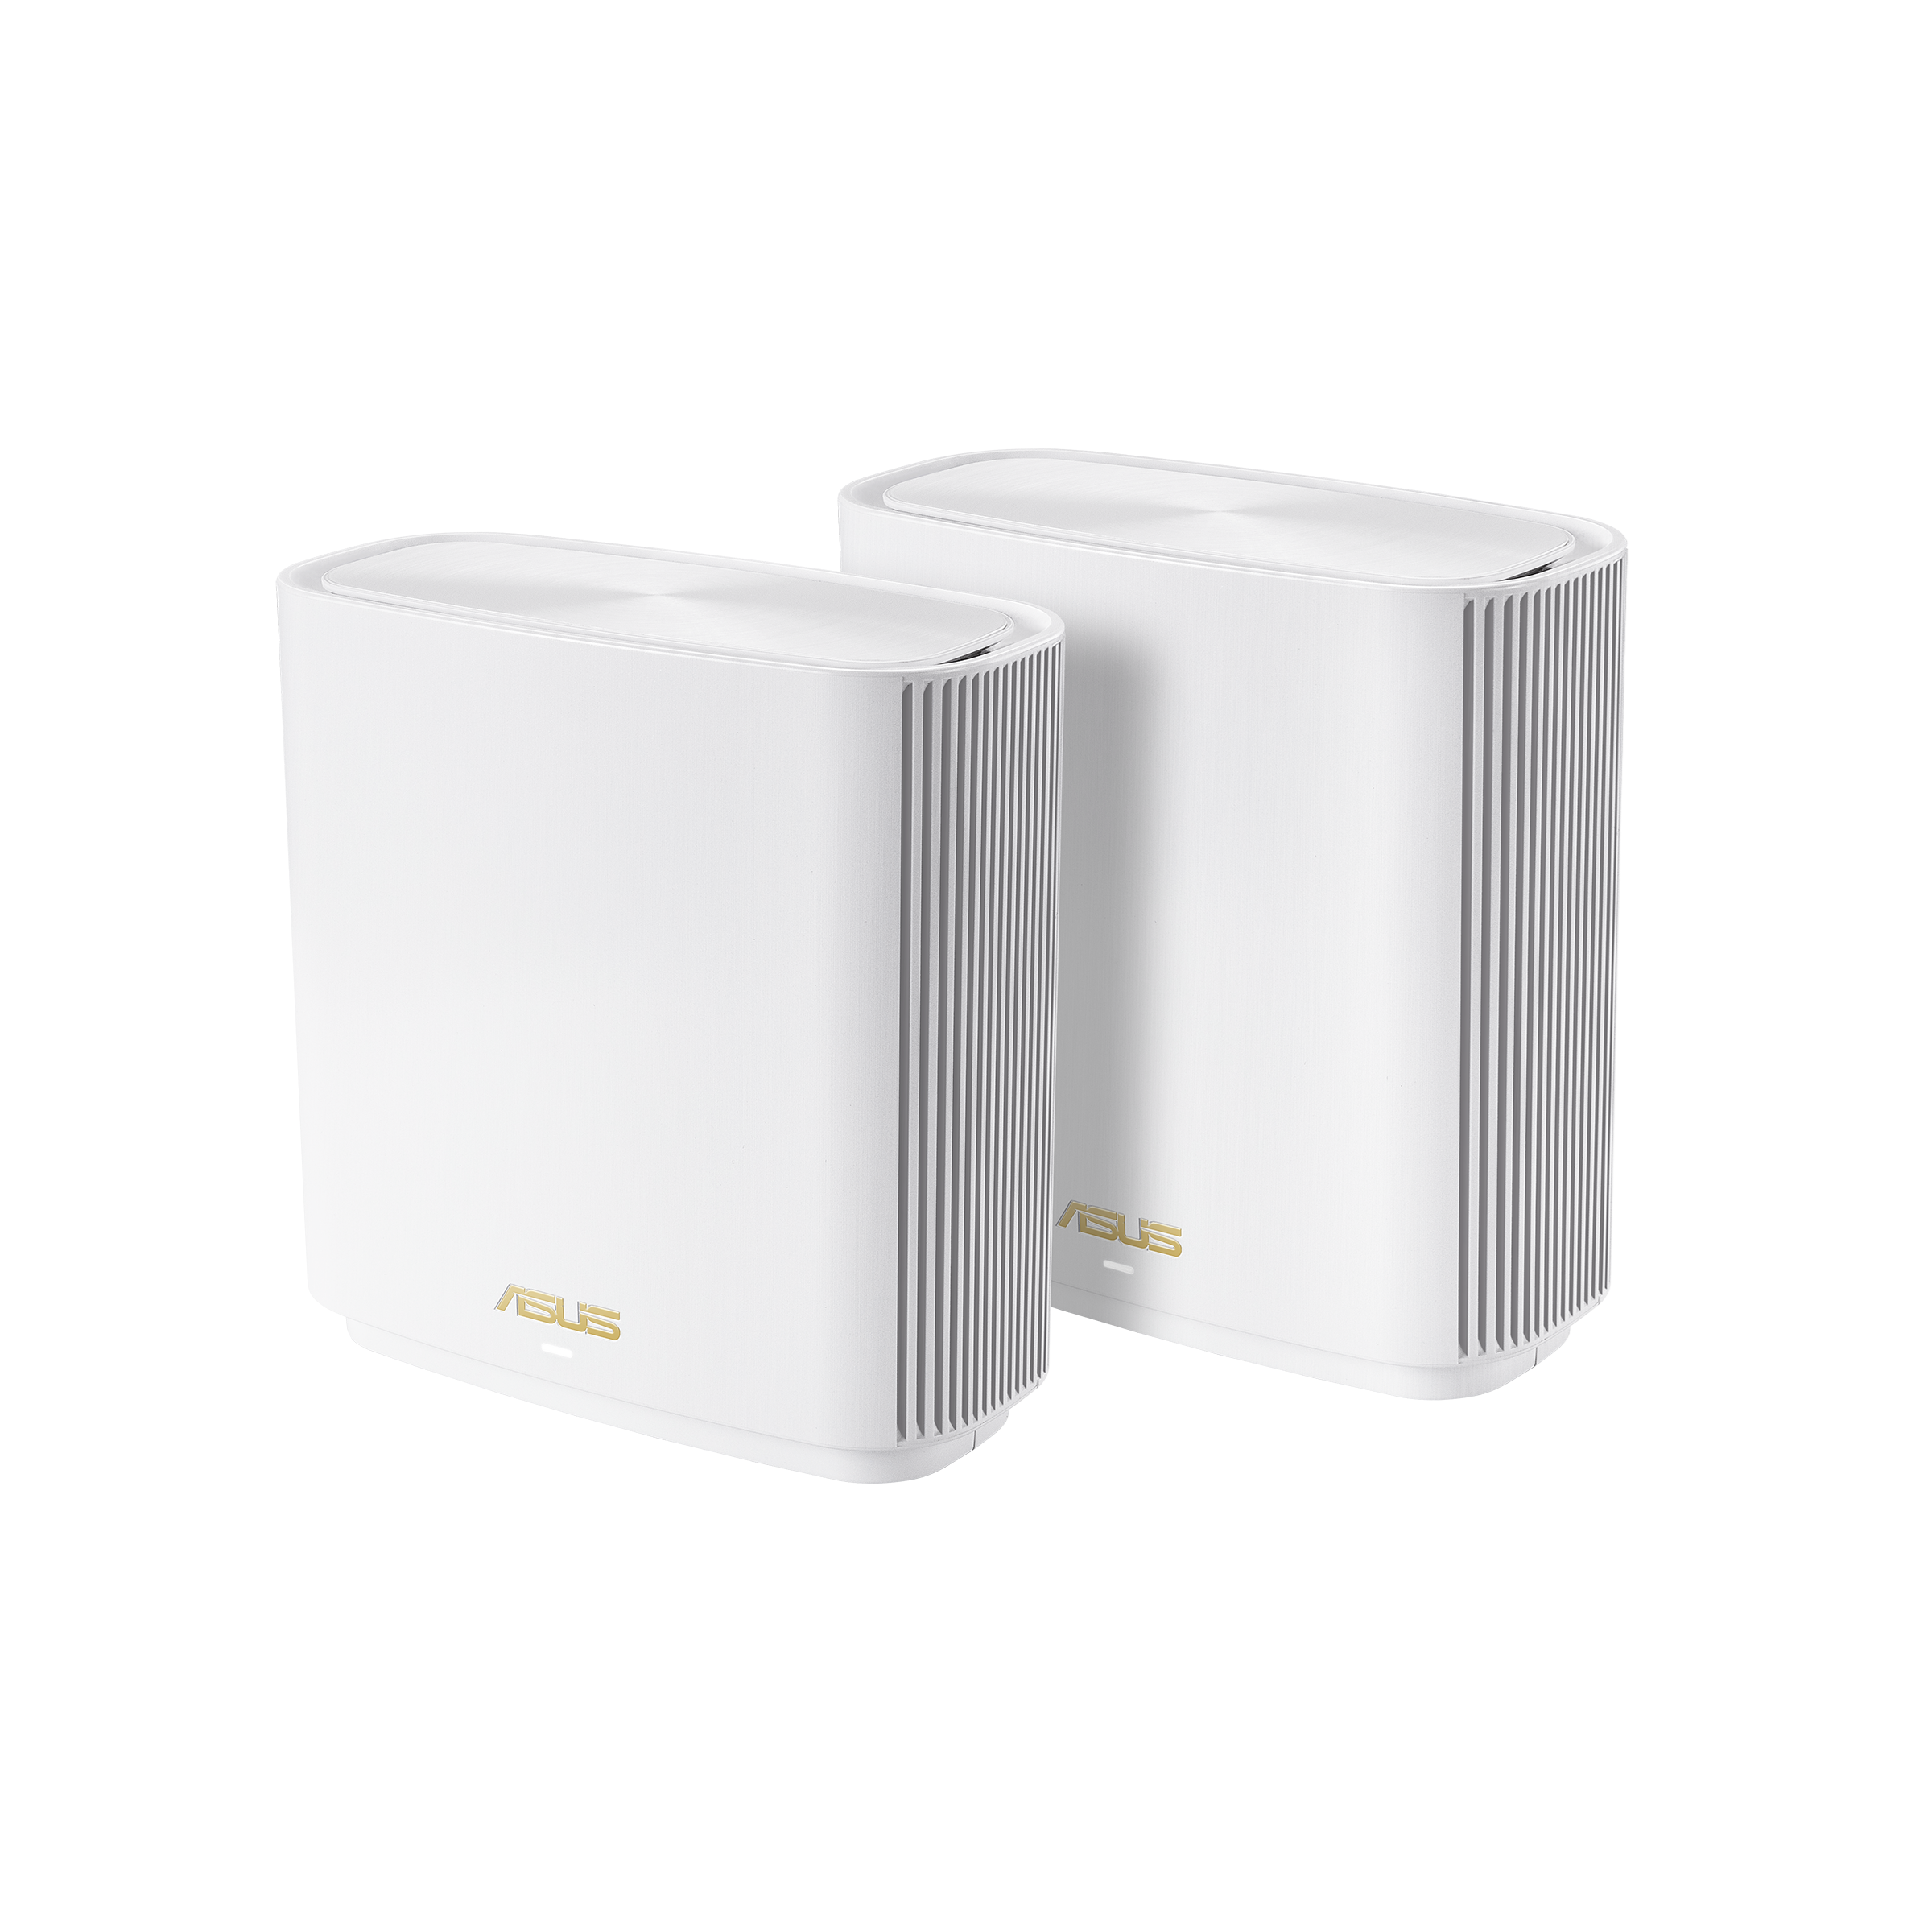 Whole Home Mesh WiFi System - All series｜ASUS Global